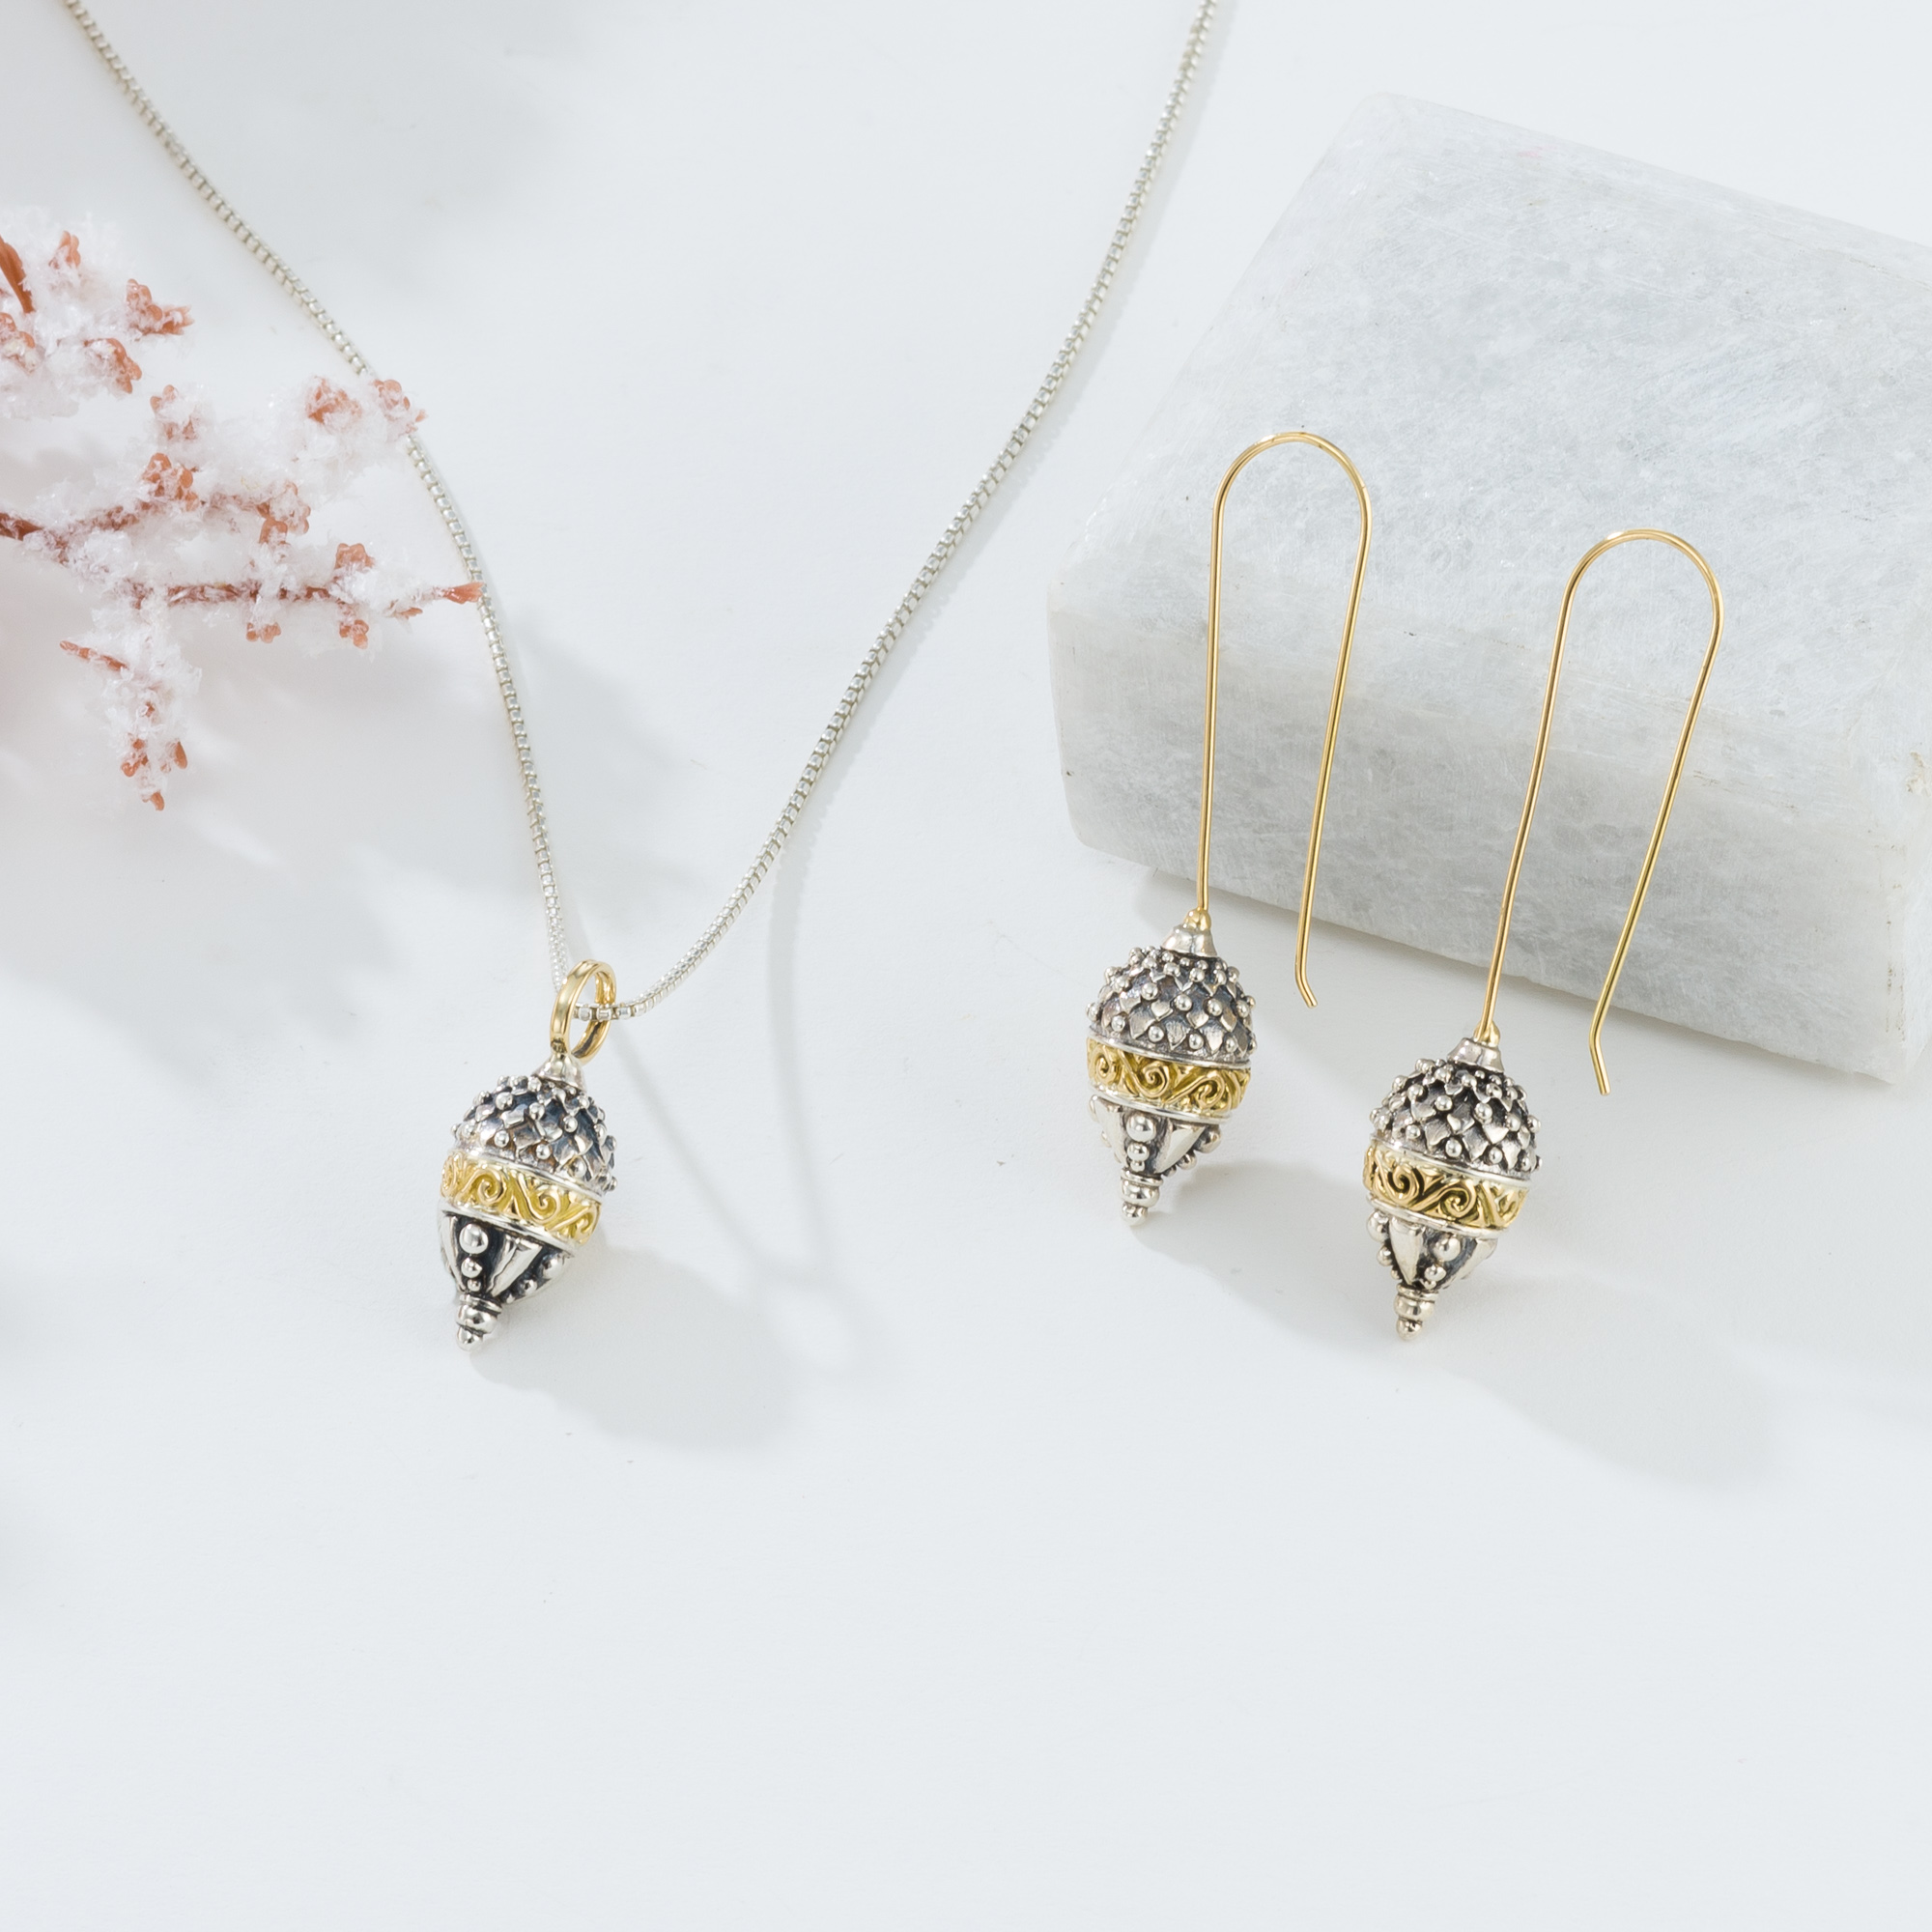 Santorini pine cone earrings in 18K Gold and Sterling Silver